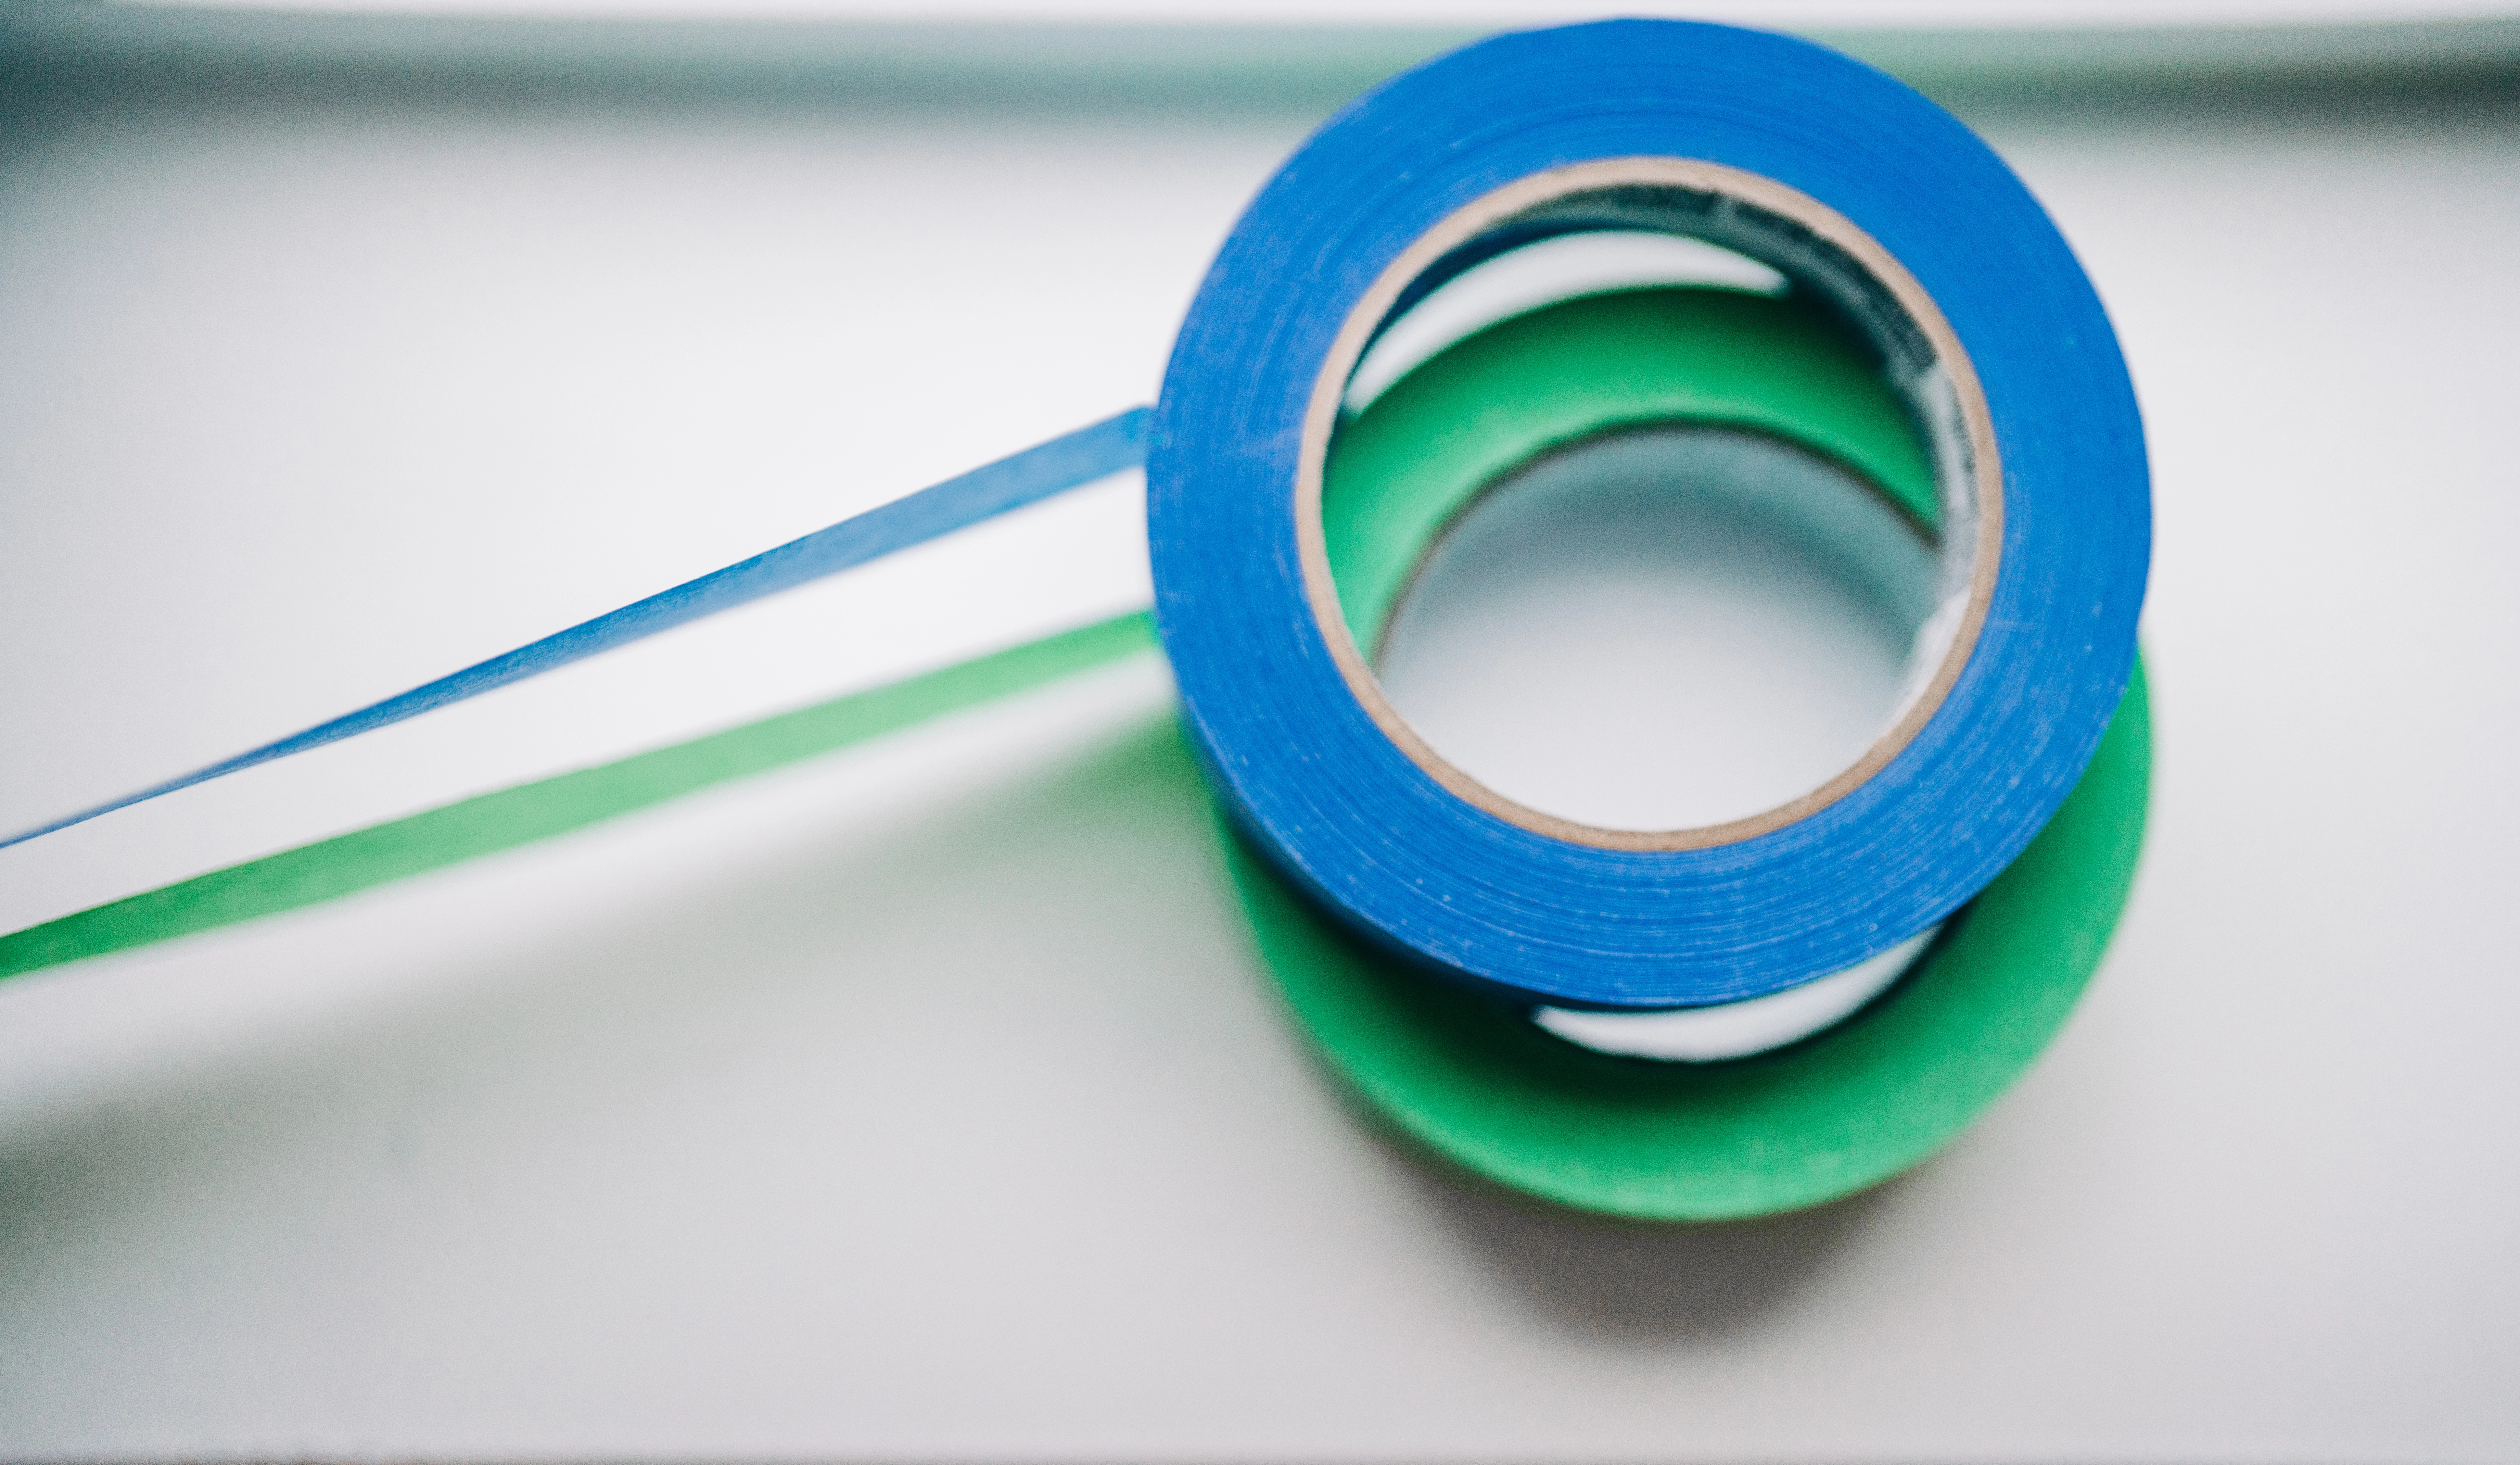 A roll of blue painter's tape stacked on green painter's tape. Both have pieces of tape unrolled.